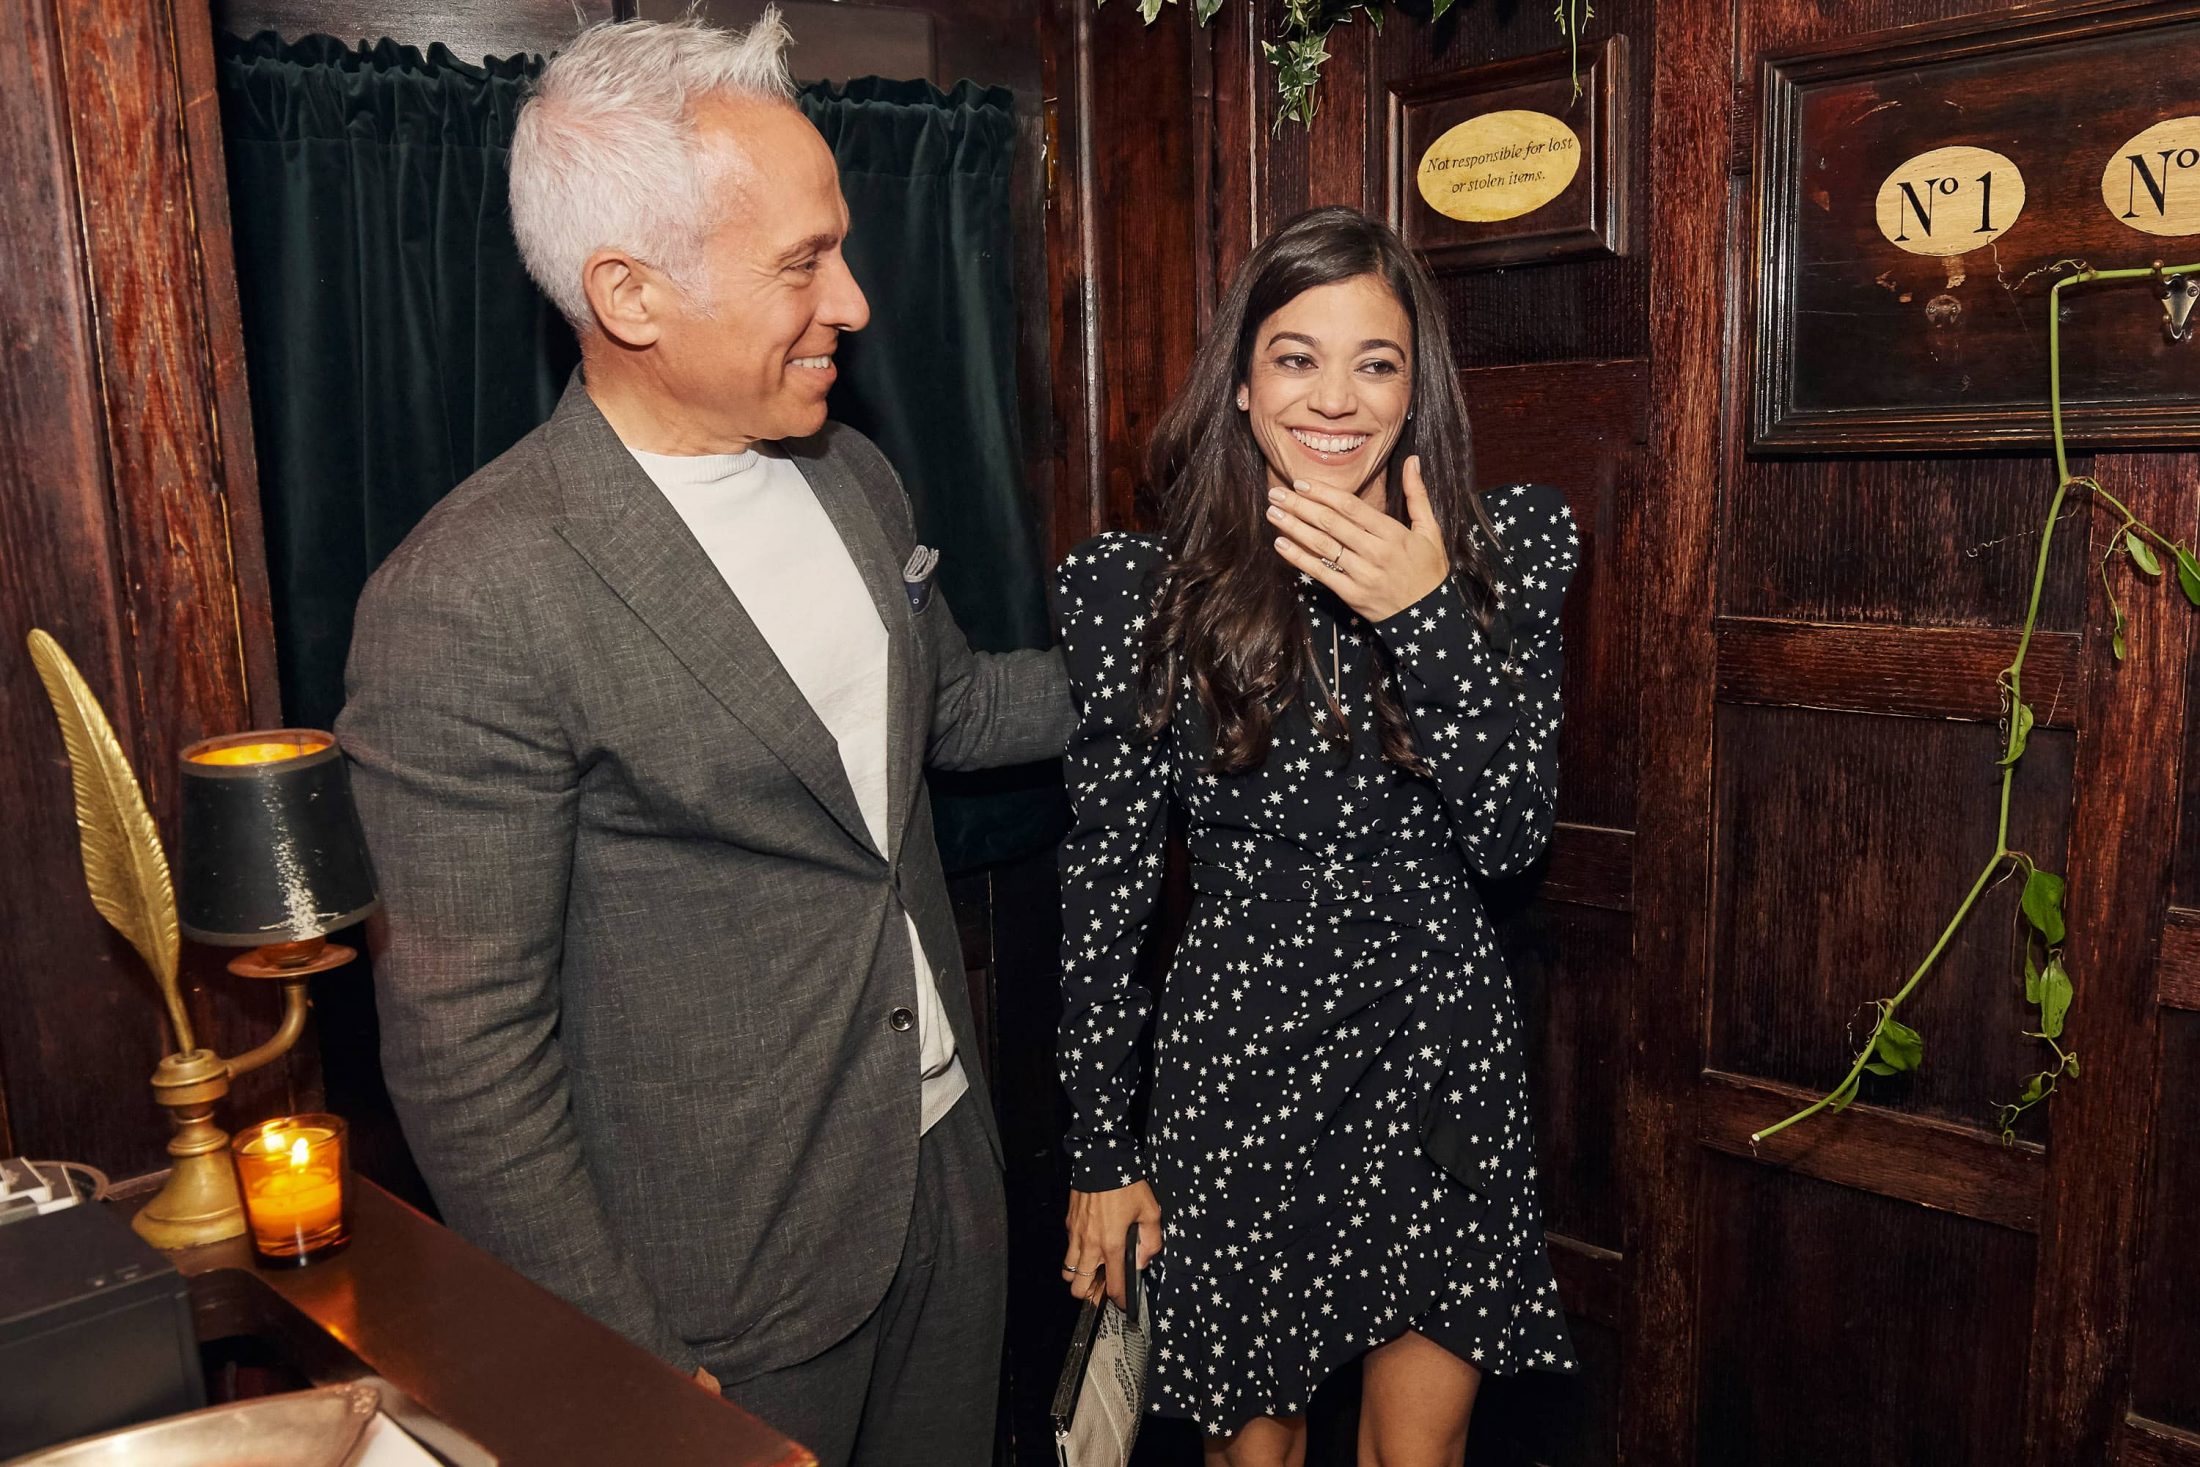 Surprised birthday girl at this 40th surprise birthday party at Beatrice Inn in West Village | Photo by Darren Ornitz